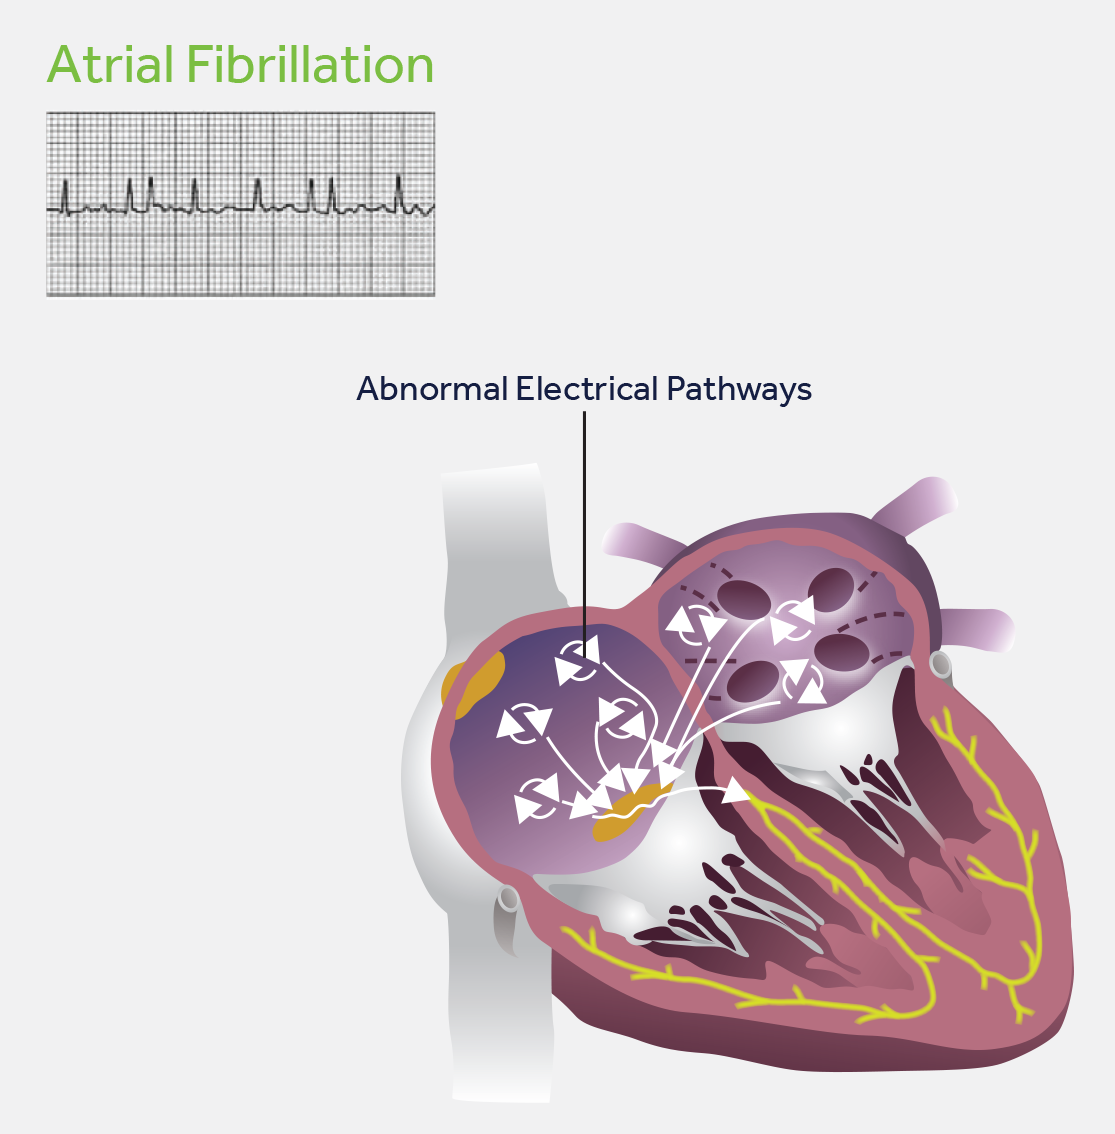 atrial fibrillation with abnormal electric pathways